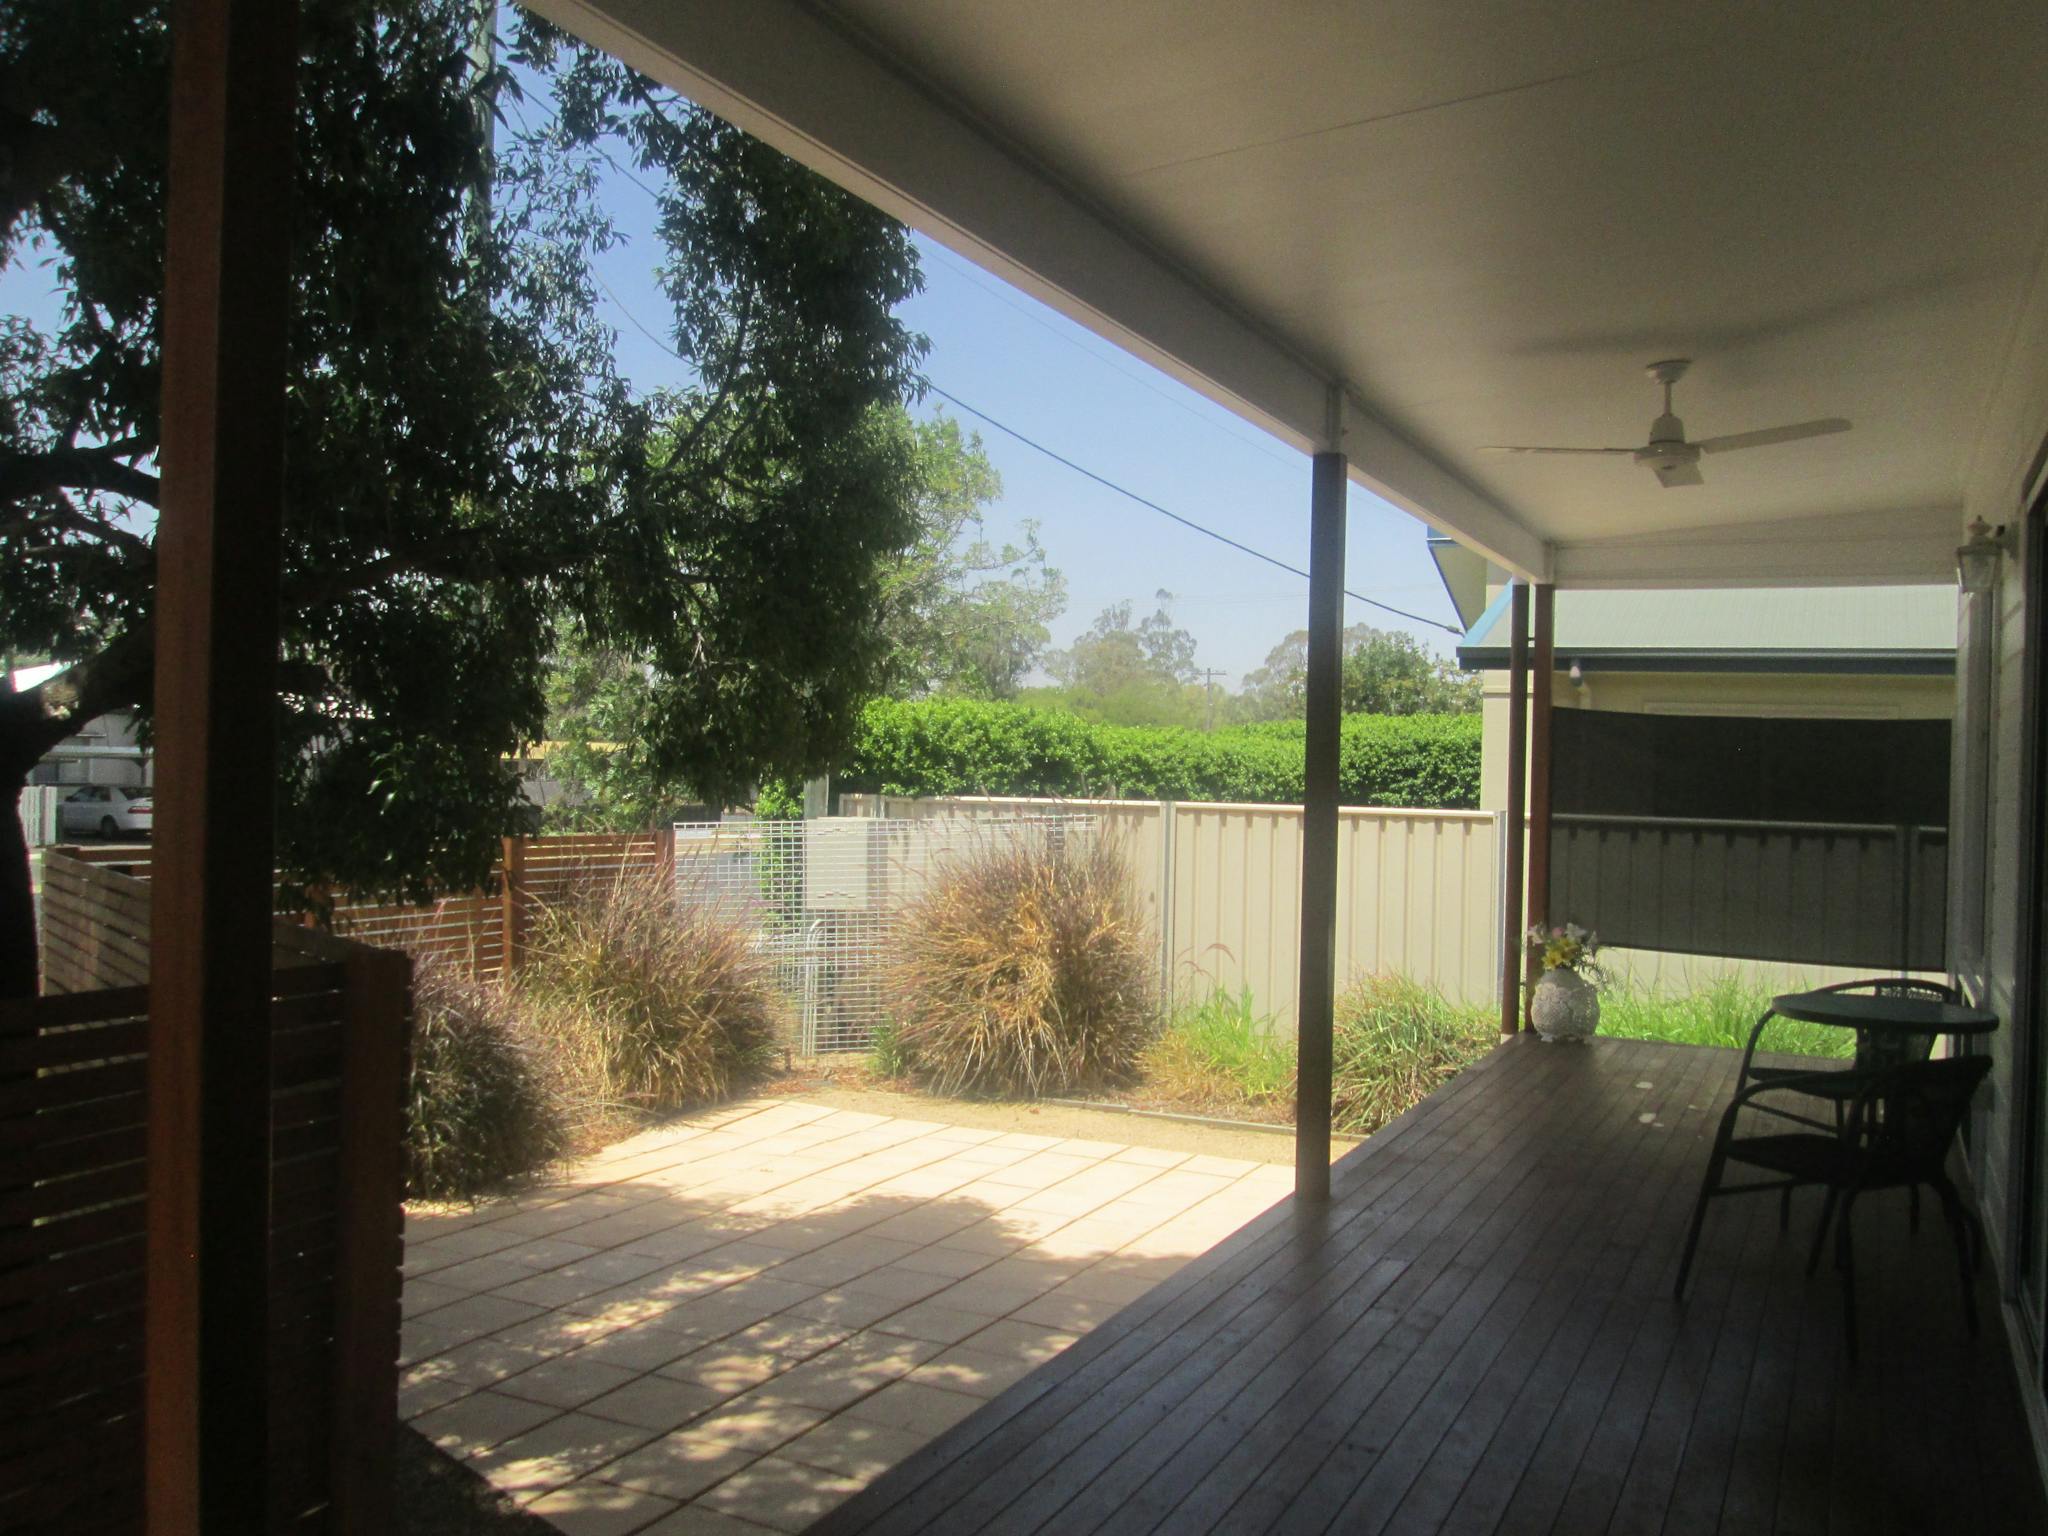 large courtyard and full verandah to enjoy the tranquility of country life.